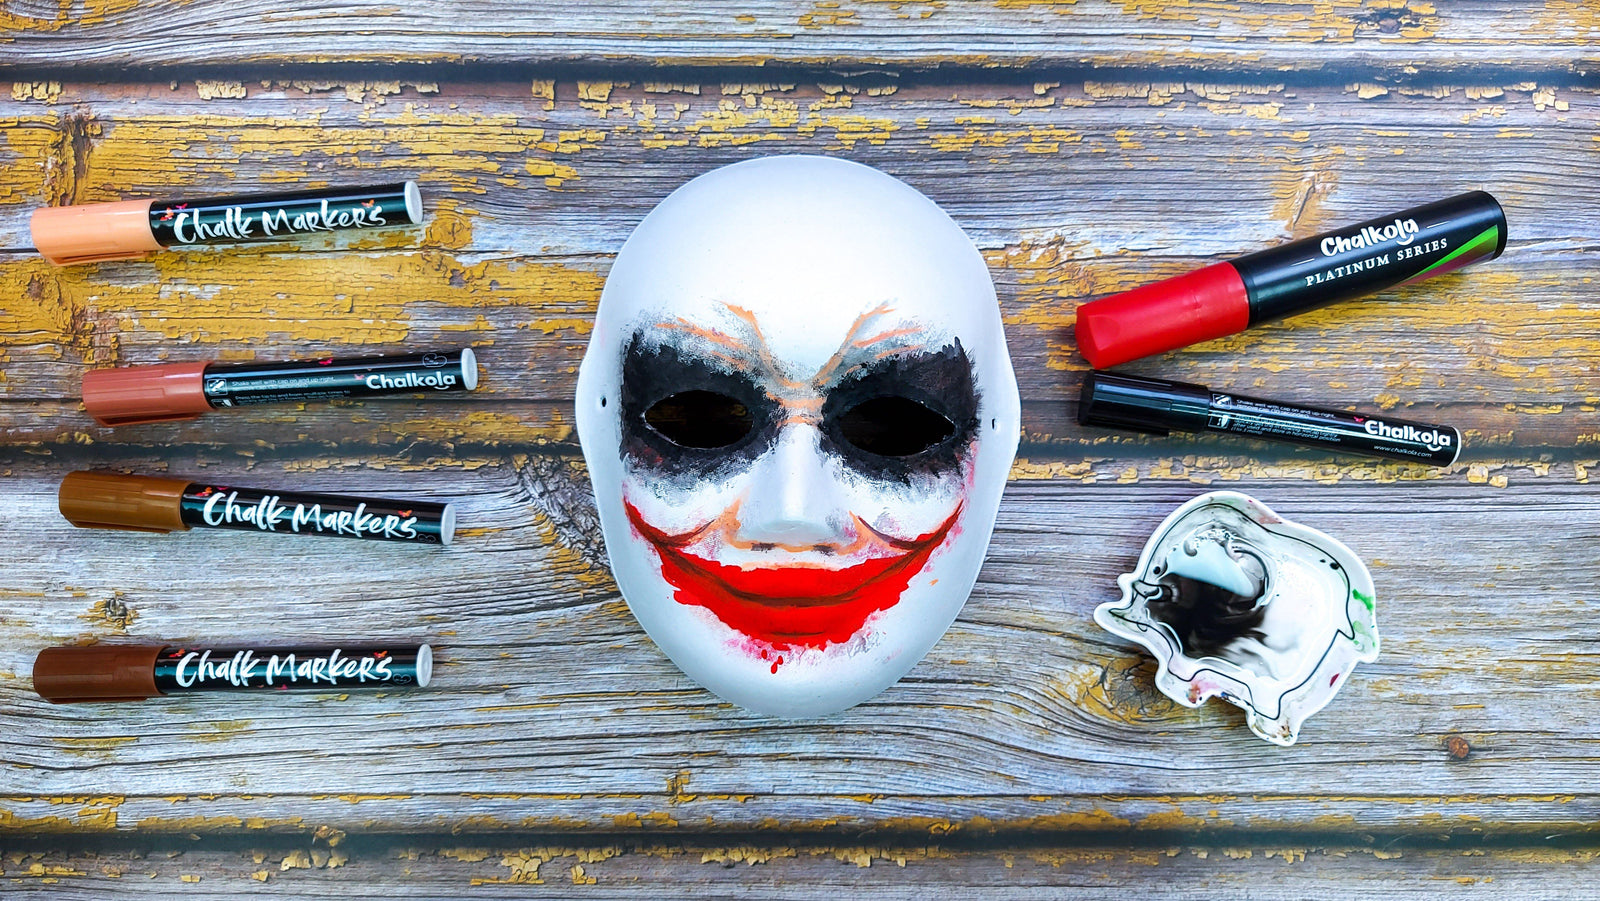 An Incredible Compilation of Joker Mask Images in Full 4K Resolution: Over 999+ Top Picks!